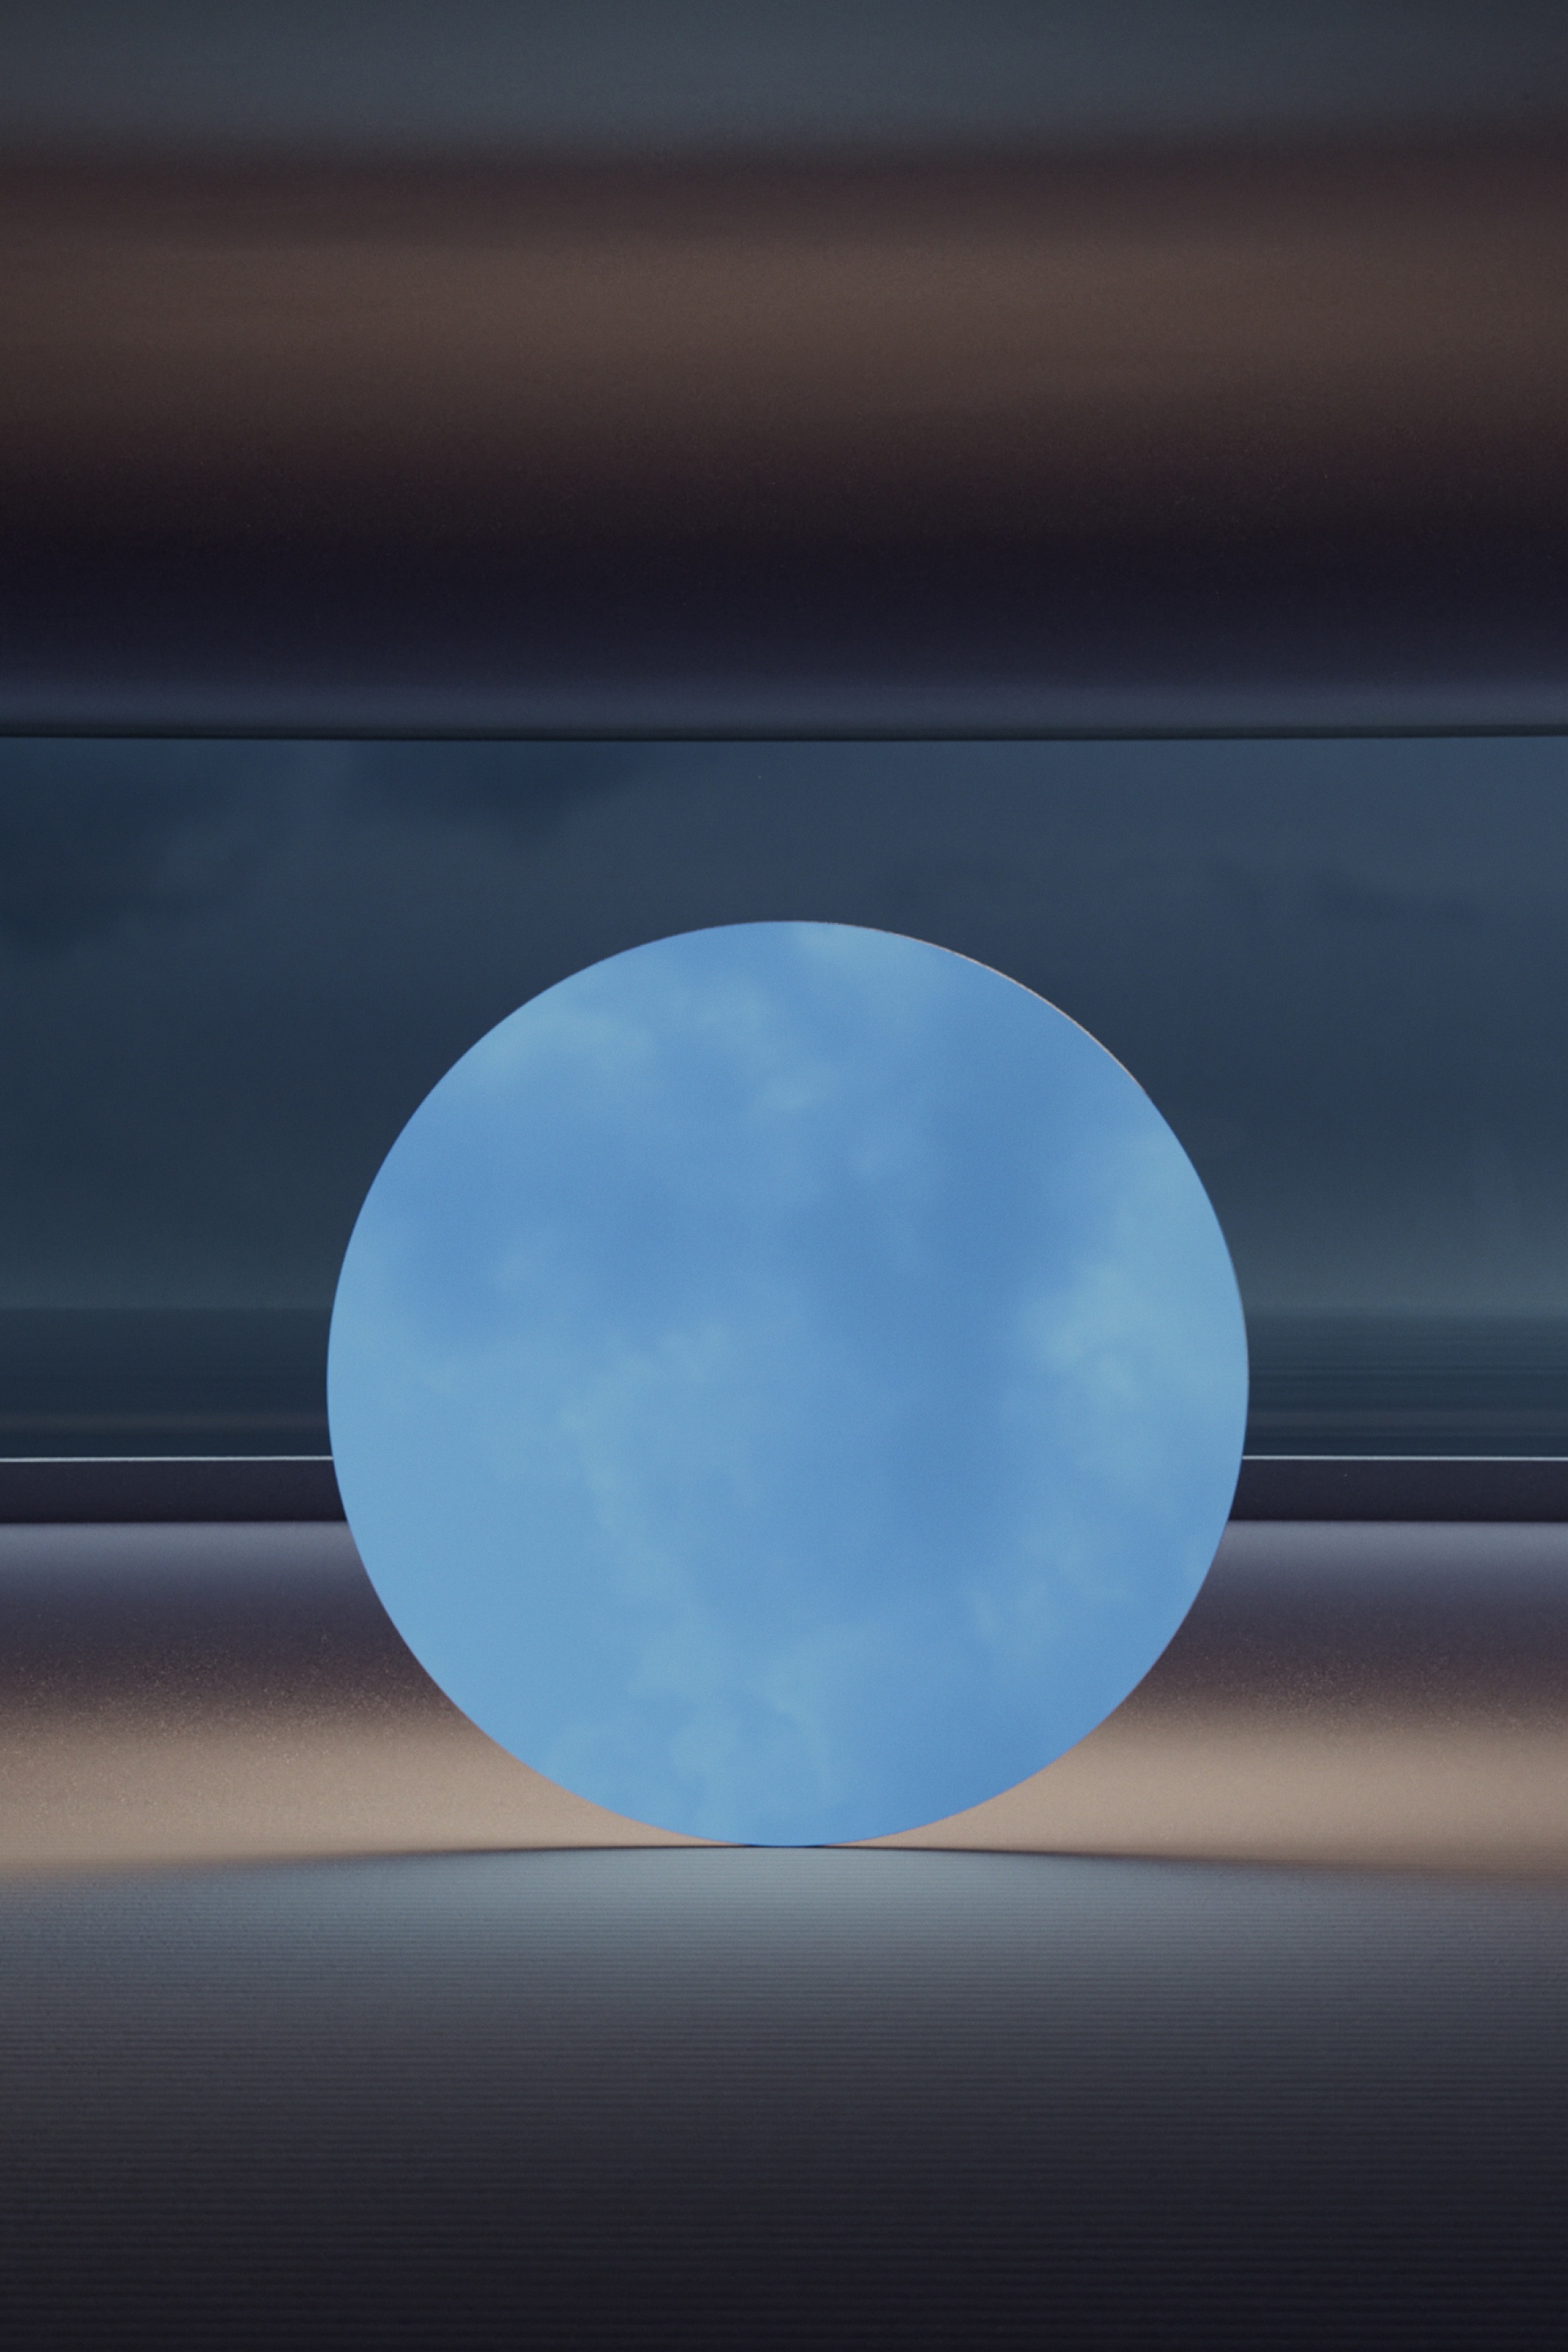 A midnight blue sky reflected in part of the artwork.